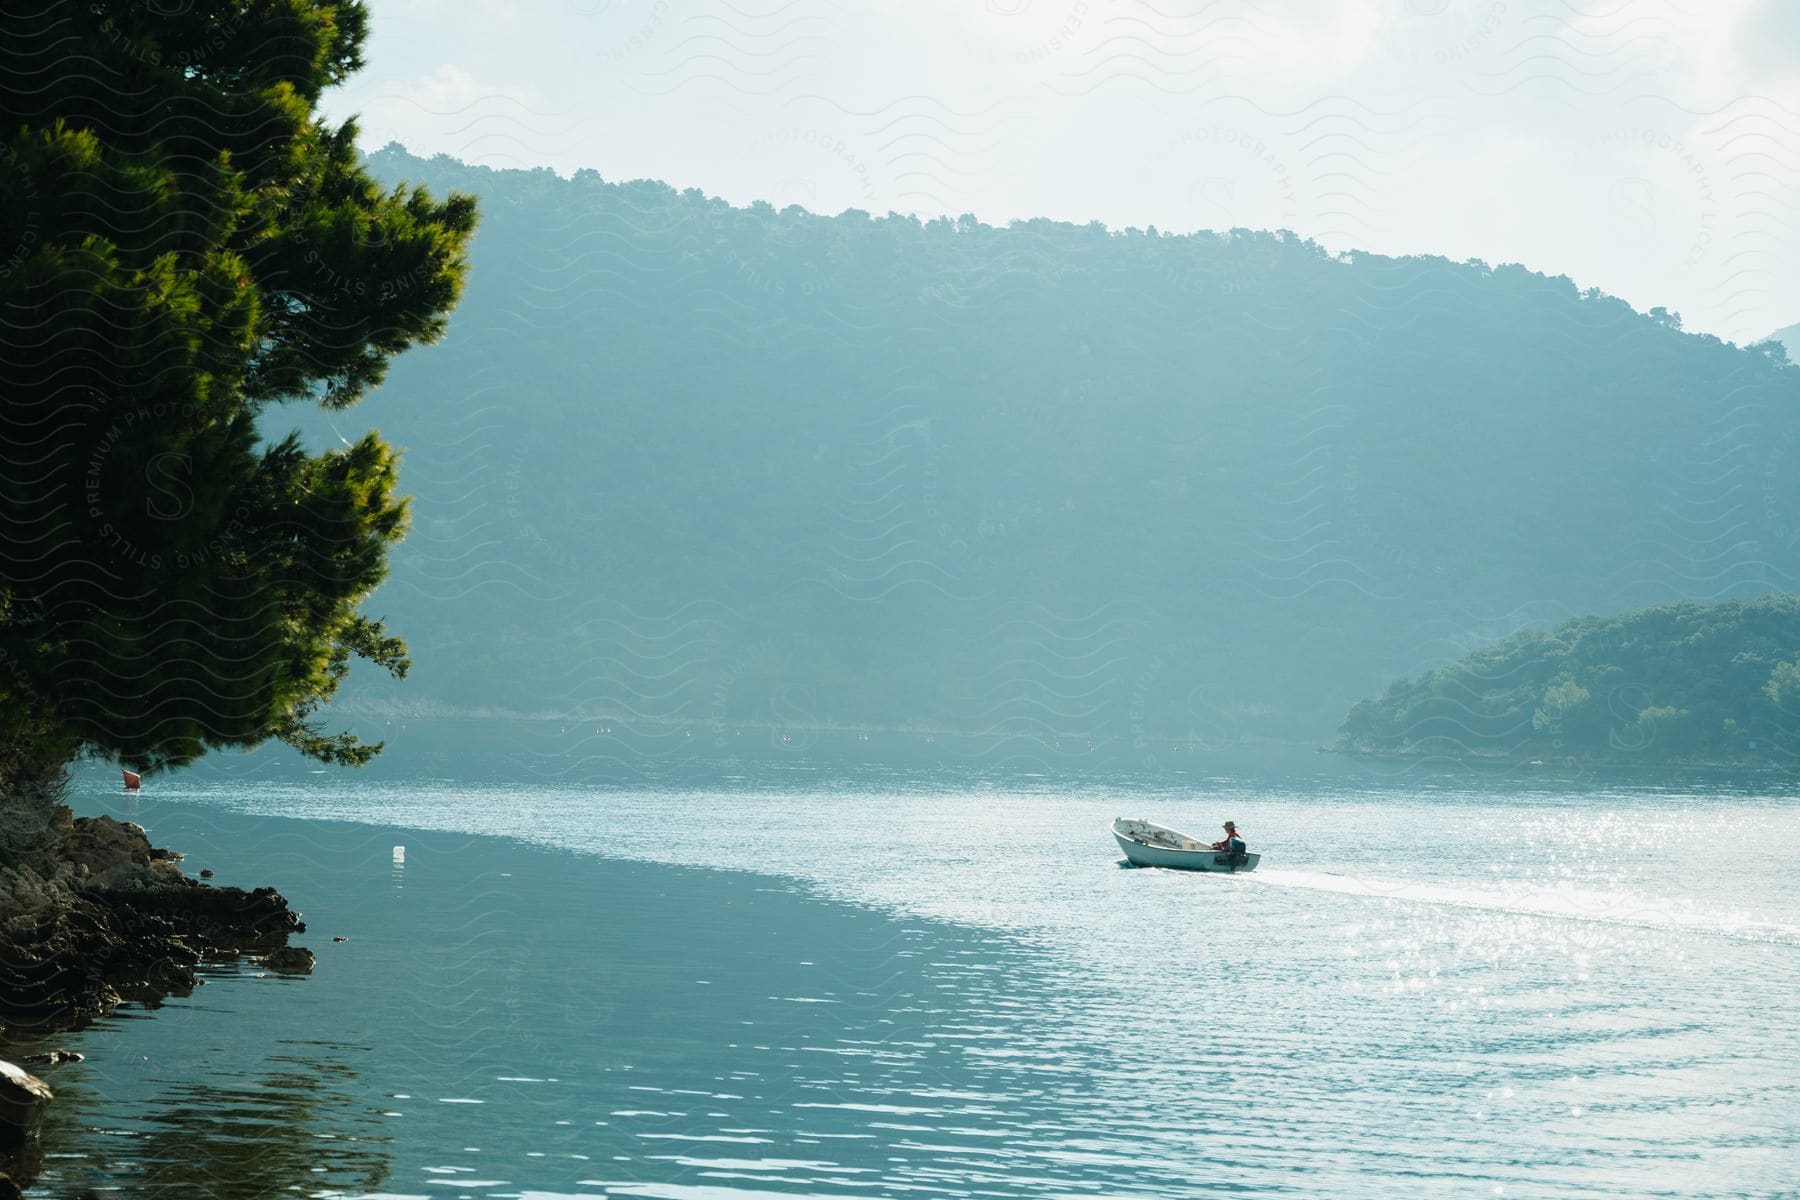 A small boat sails across a lake with a forested mountain in the background